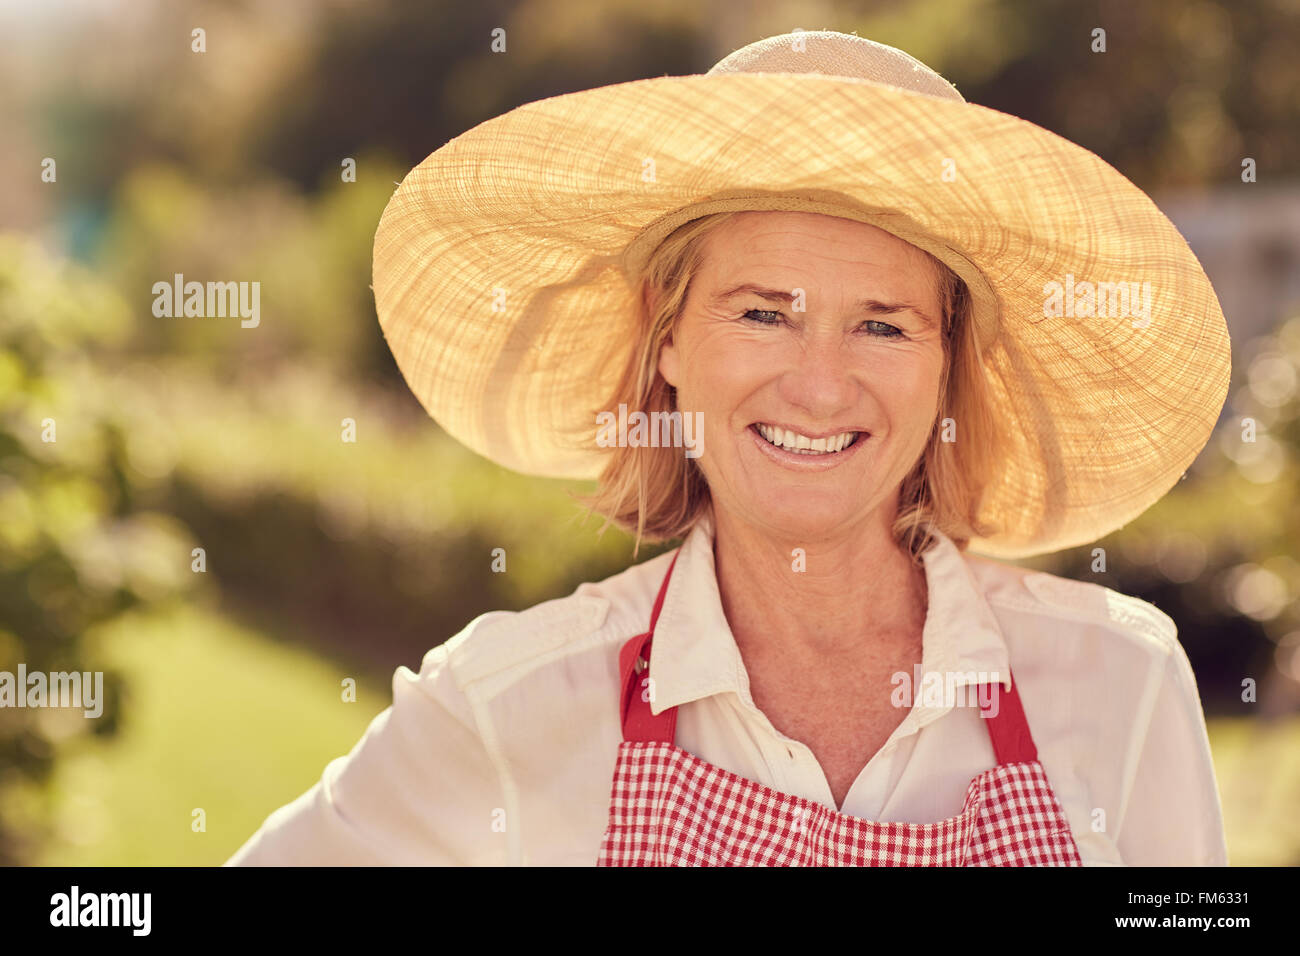 Portrait of a smiling woman in straw hat outdoors Banque D'Images